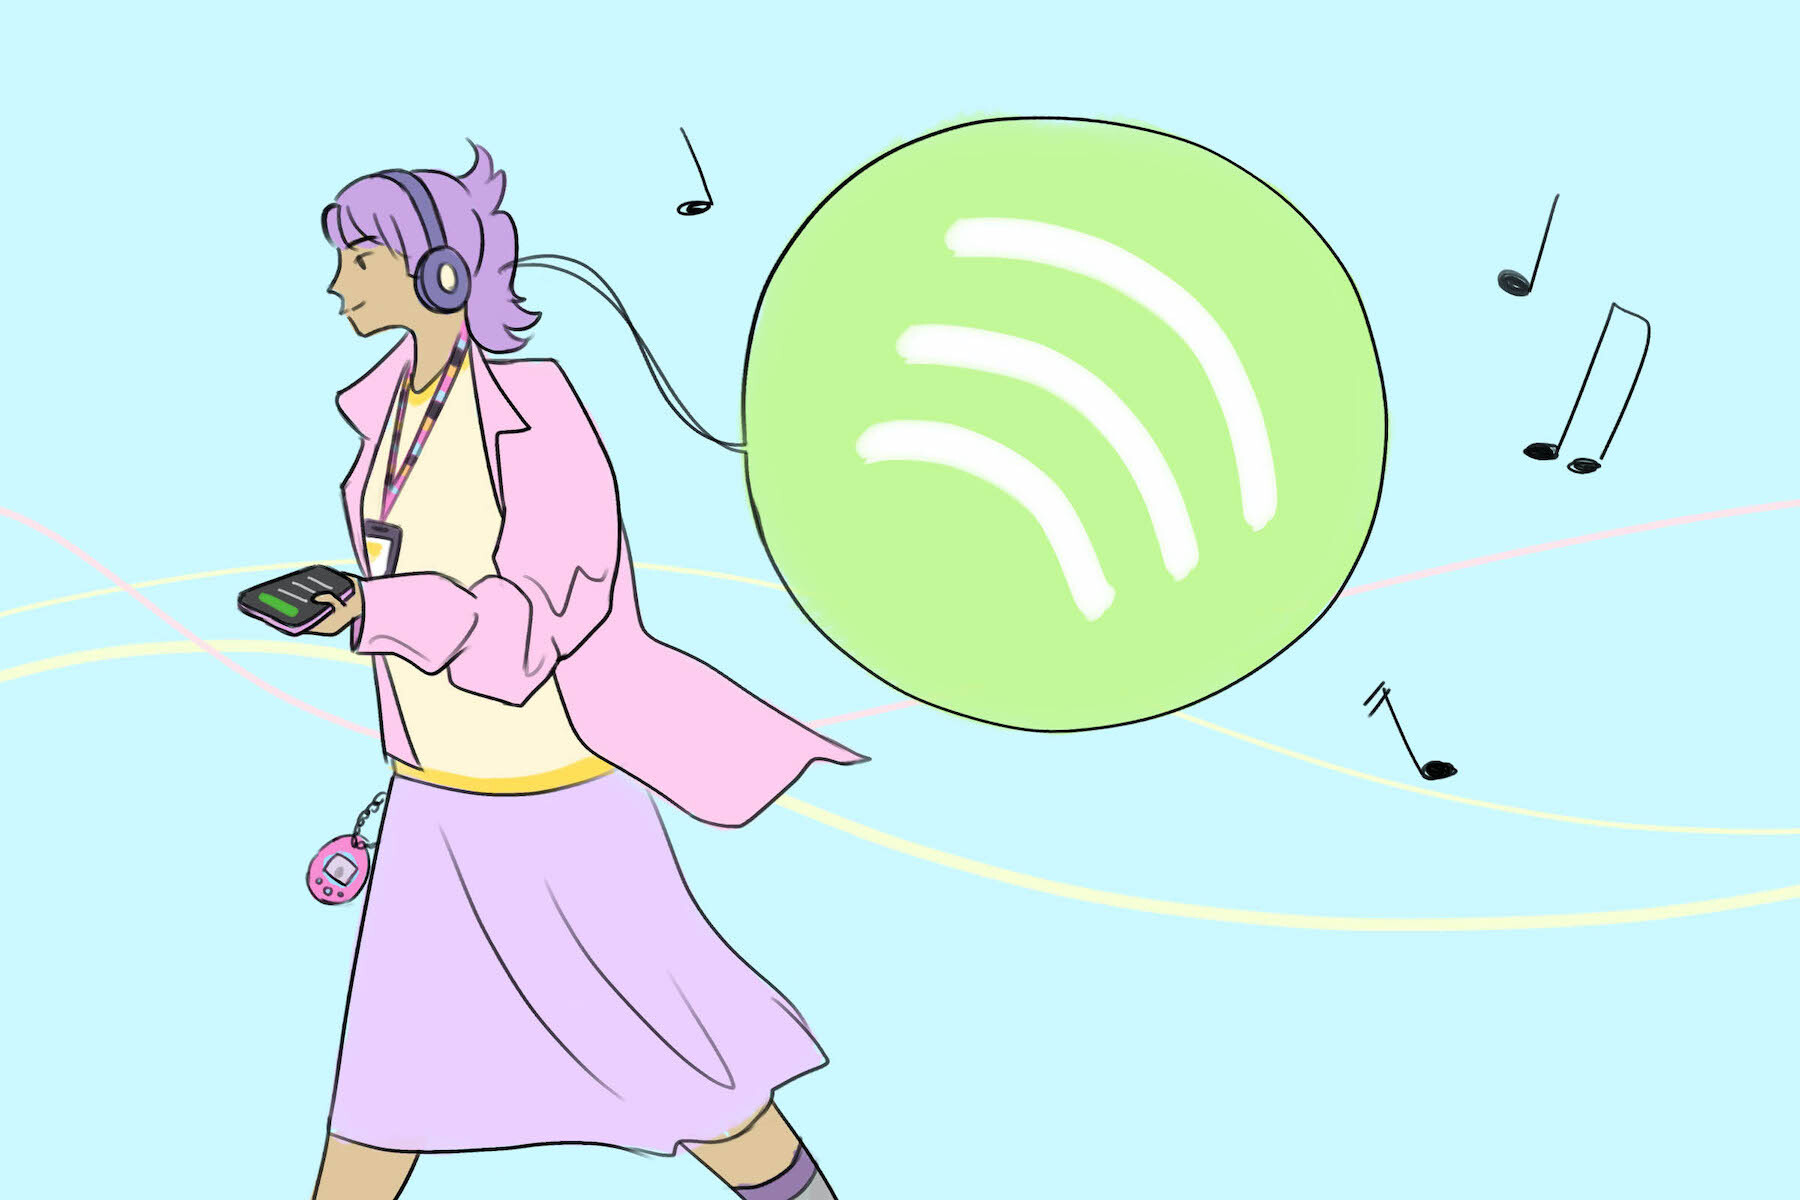 In an article about Apple Music vs. Spotify, a woman walks with headphones in her ears and the Spotify logo following her.